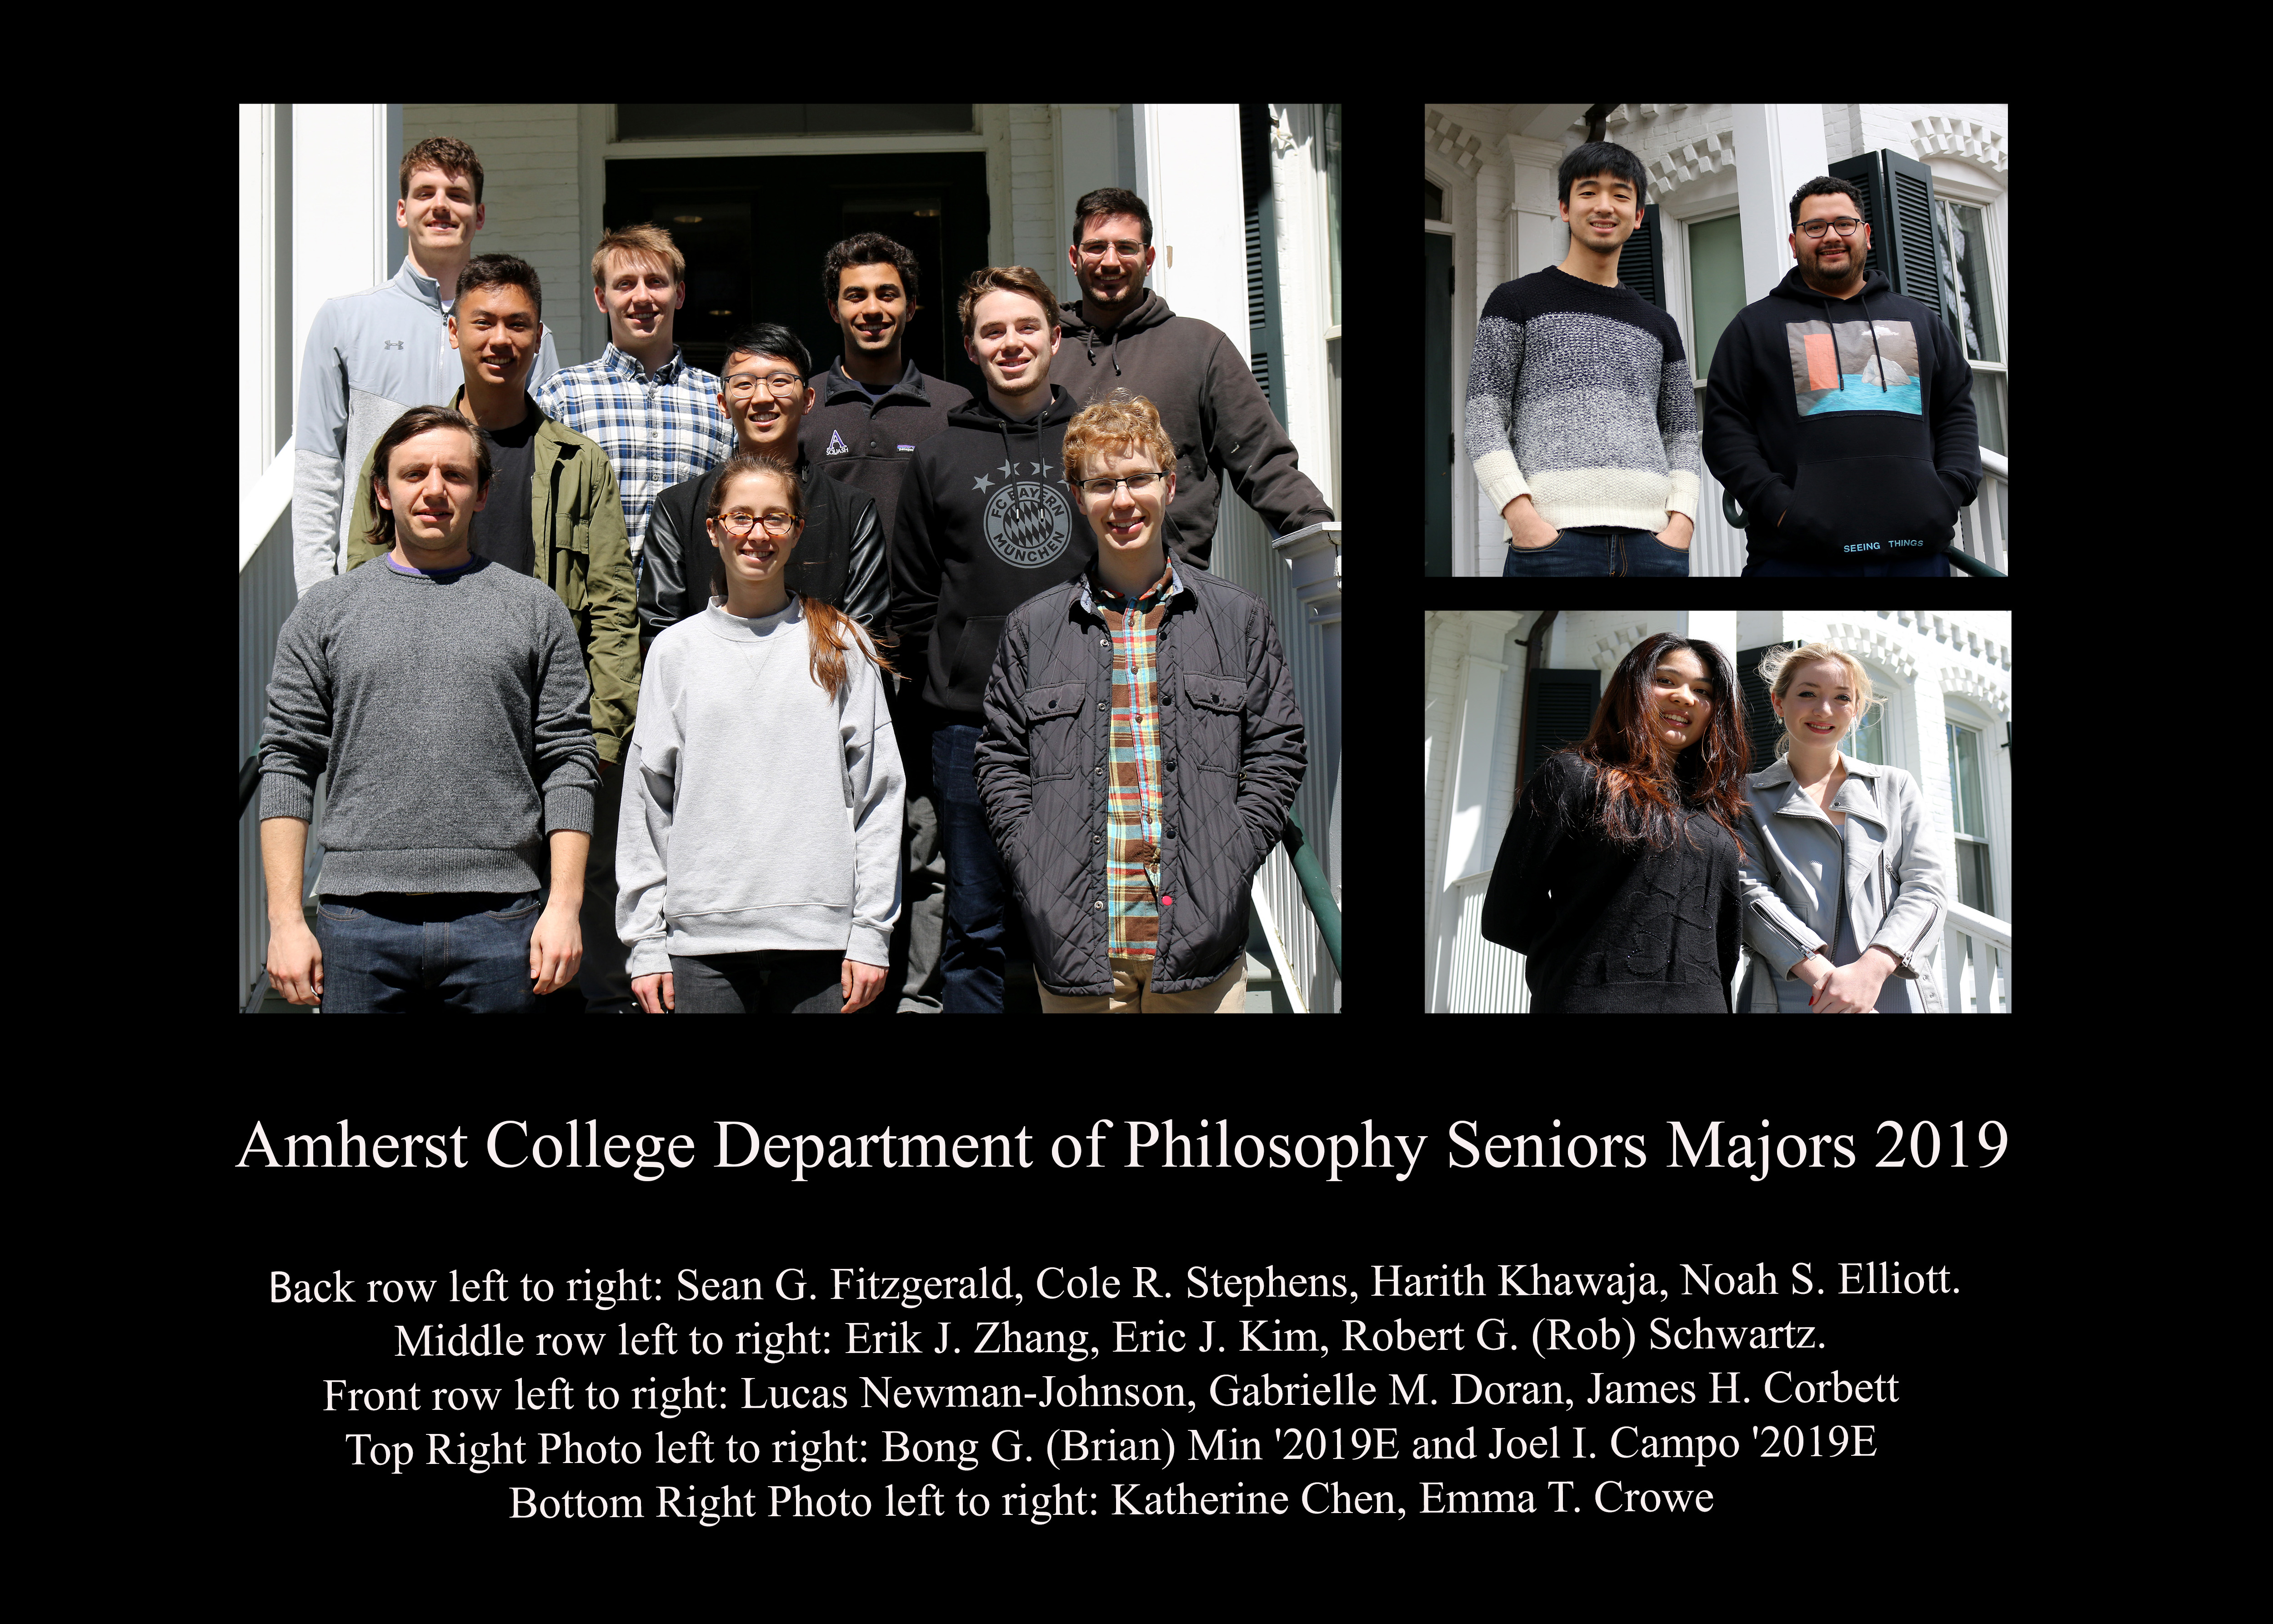 Fourteen seniors who are Philosophy majors at Amherst College posing together outside